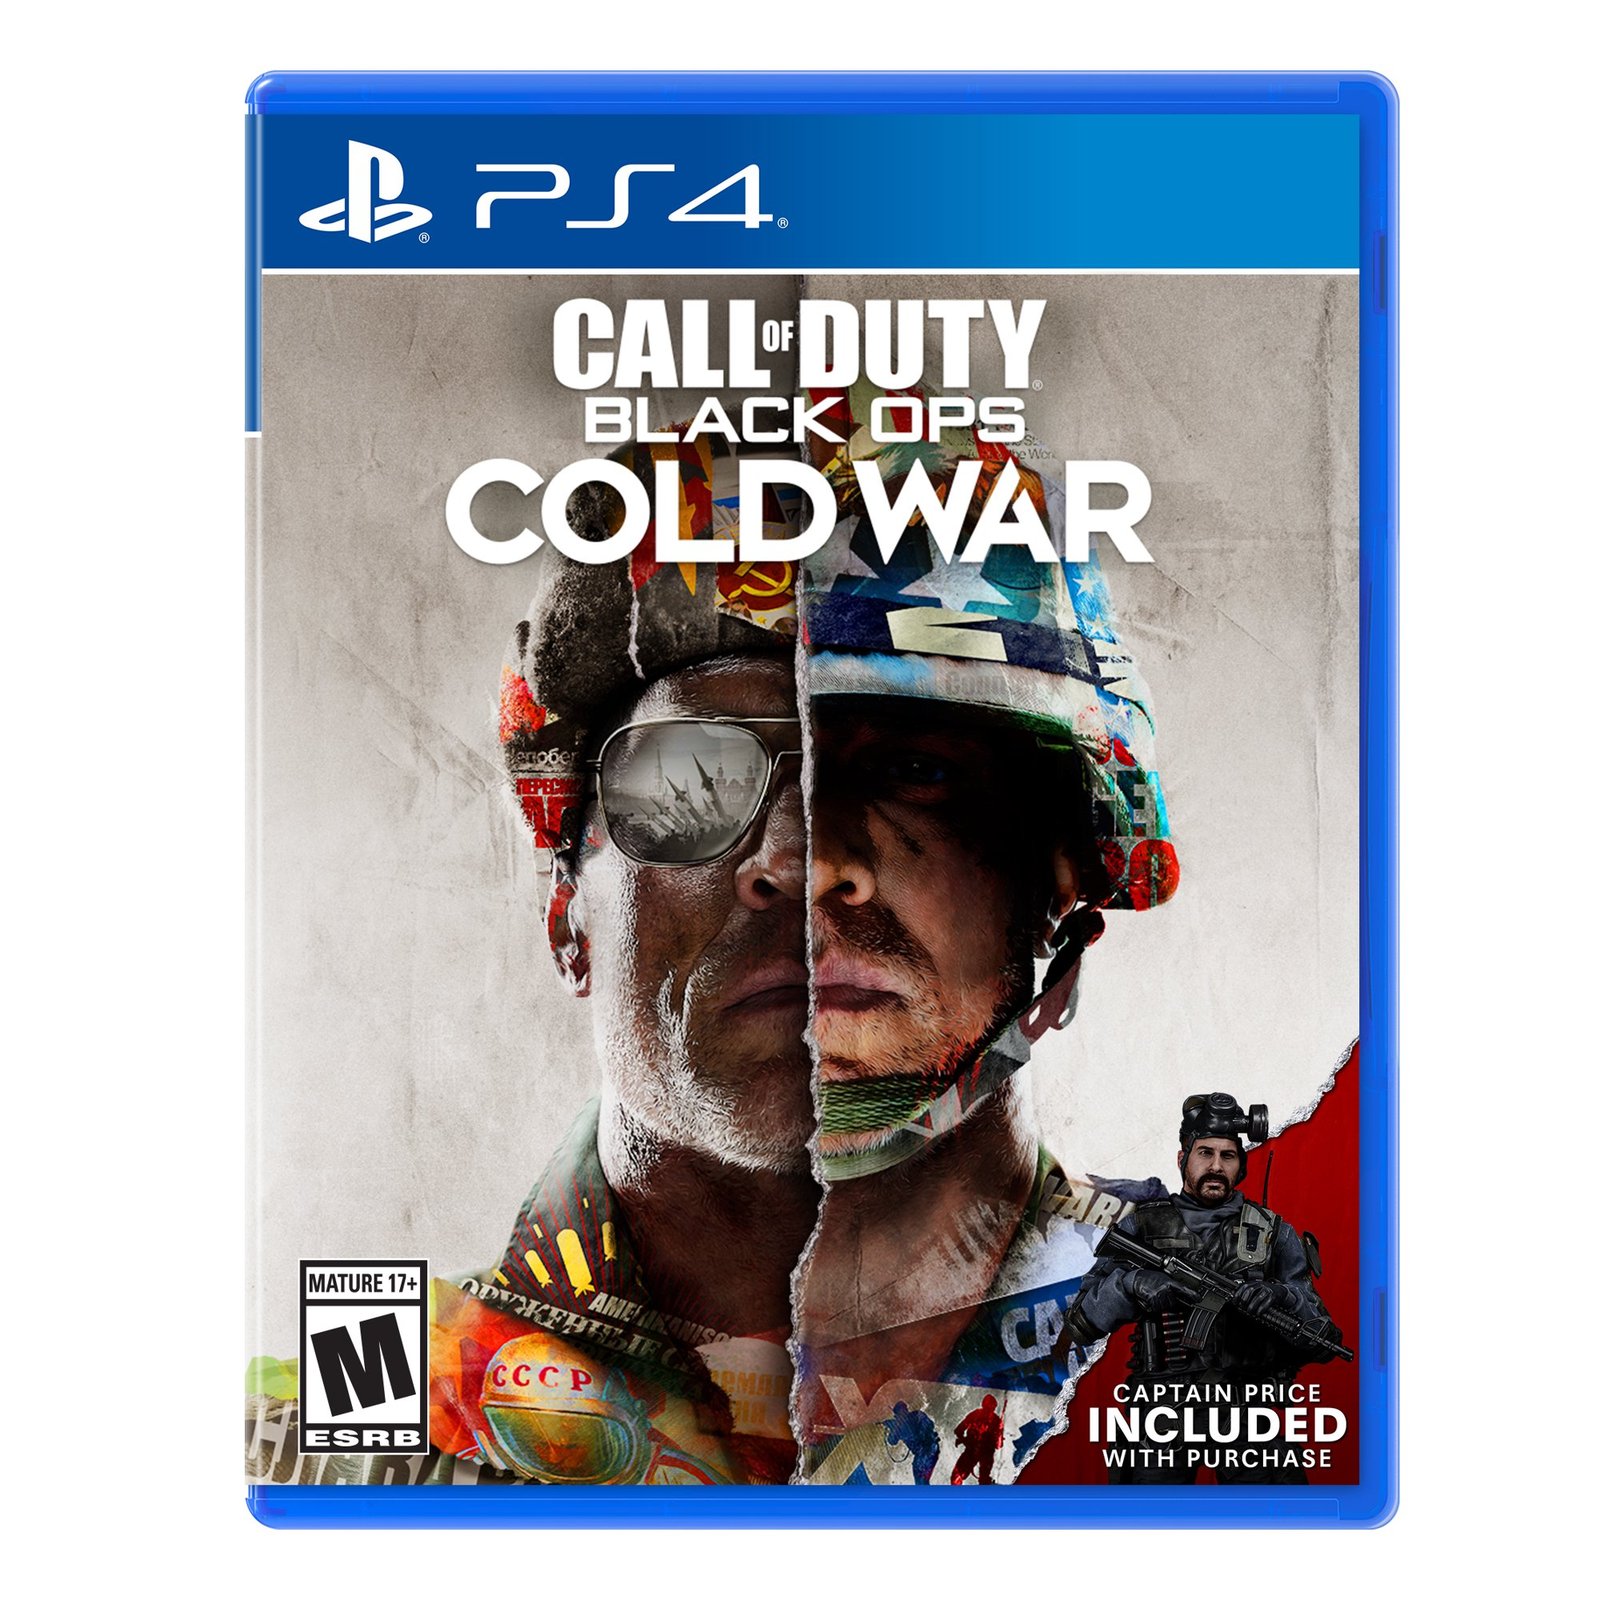 Call of Duty Black Ops Cold War PlayStation 4 Activision Video Games (Brand New)